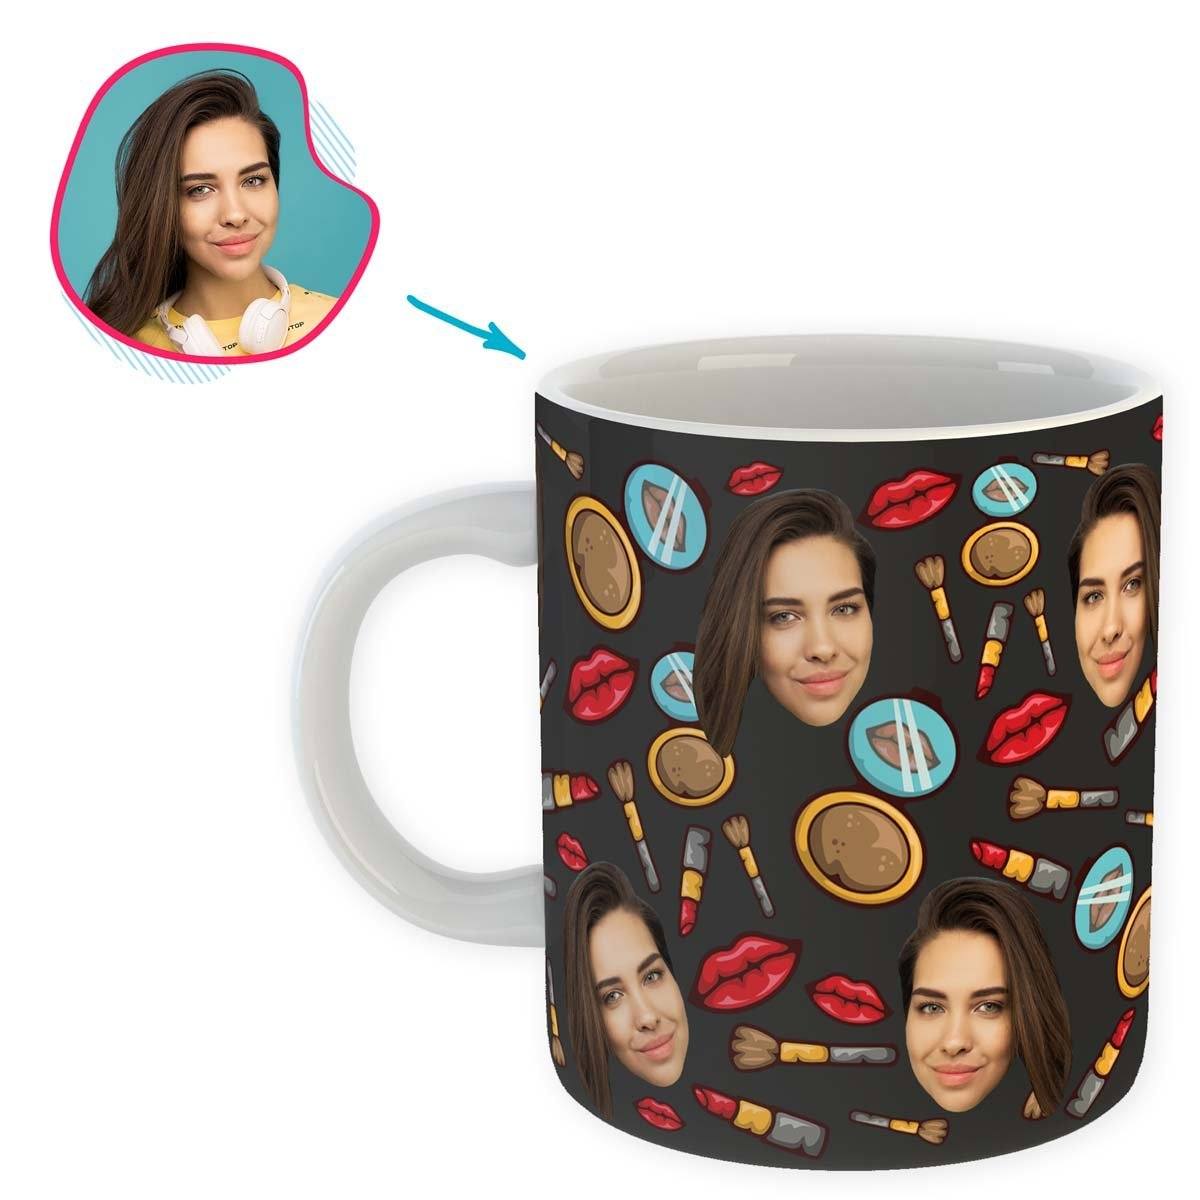 Dark Makeup personalized mug with photo of face printed on it